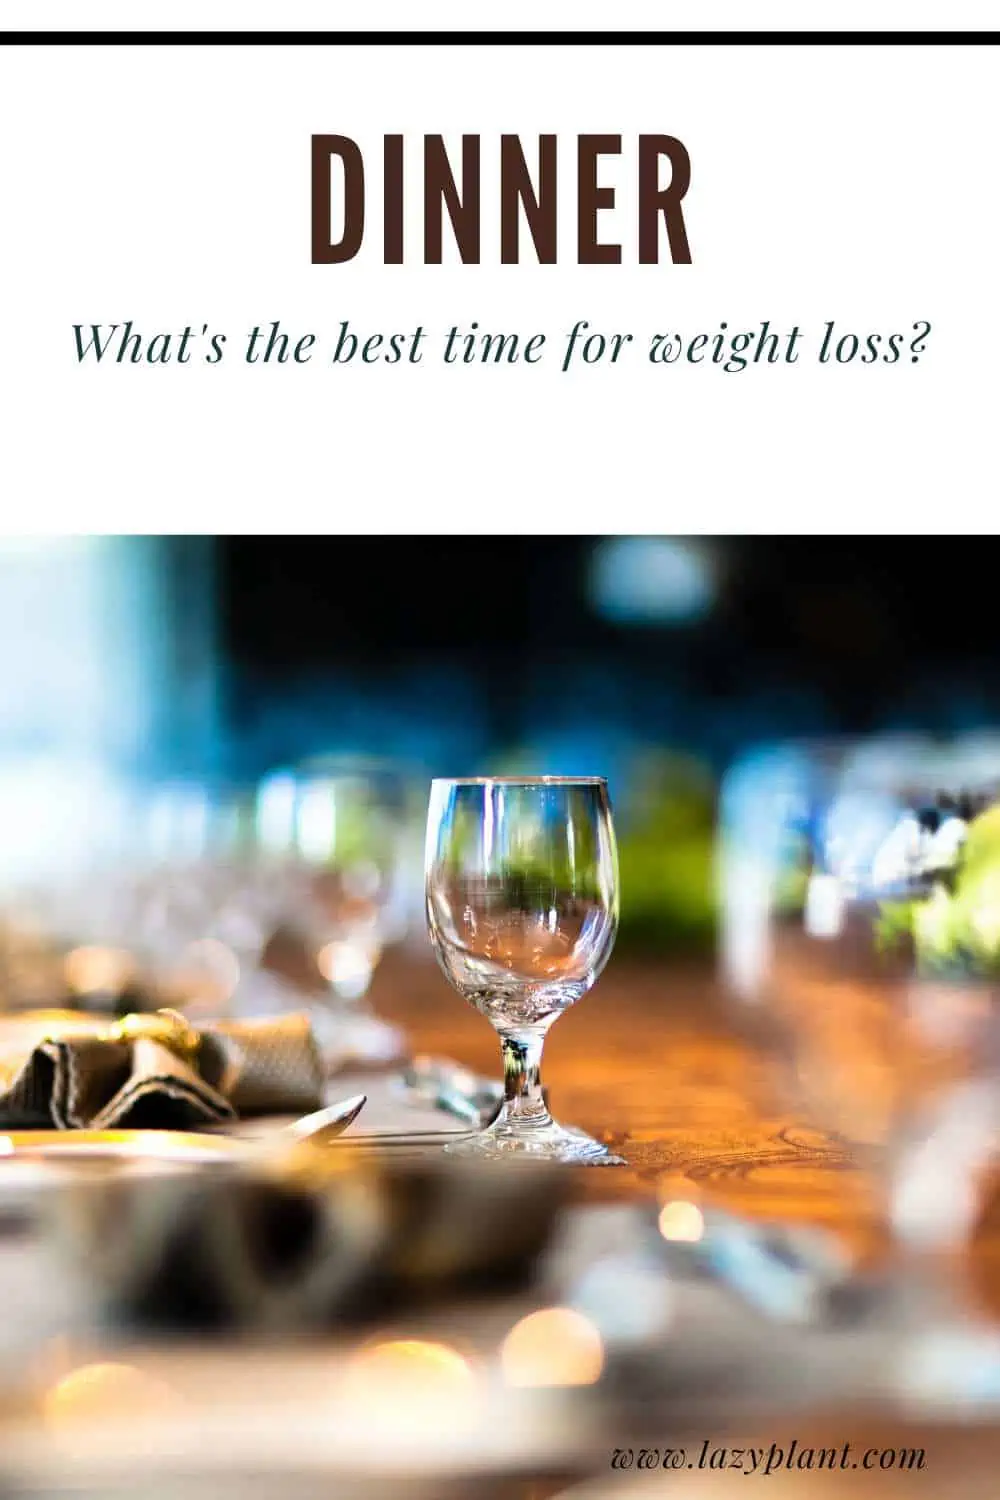 For weight loss, when is the most suitable time to have dinner?